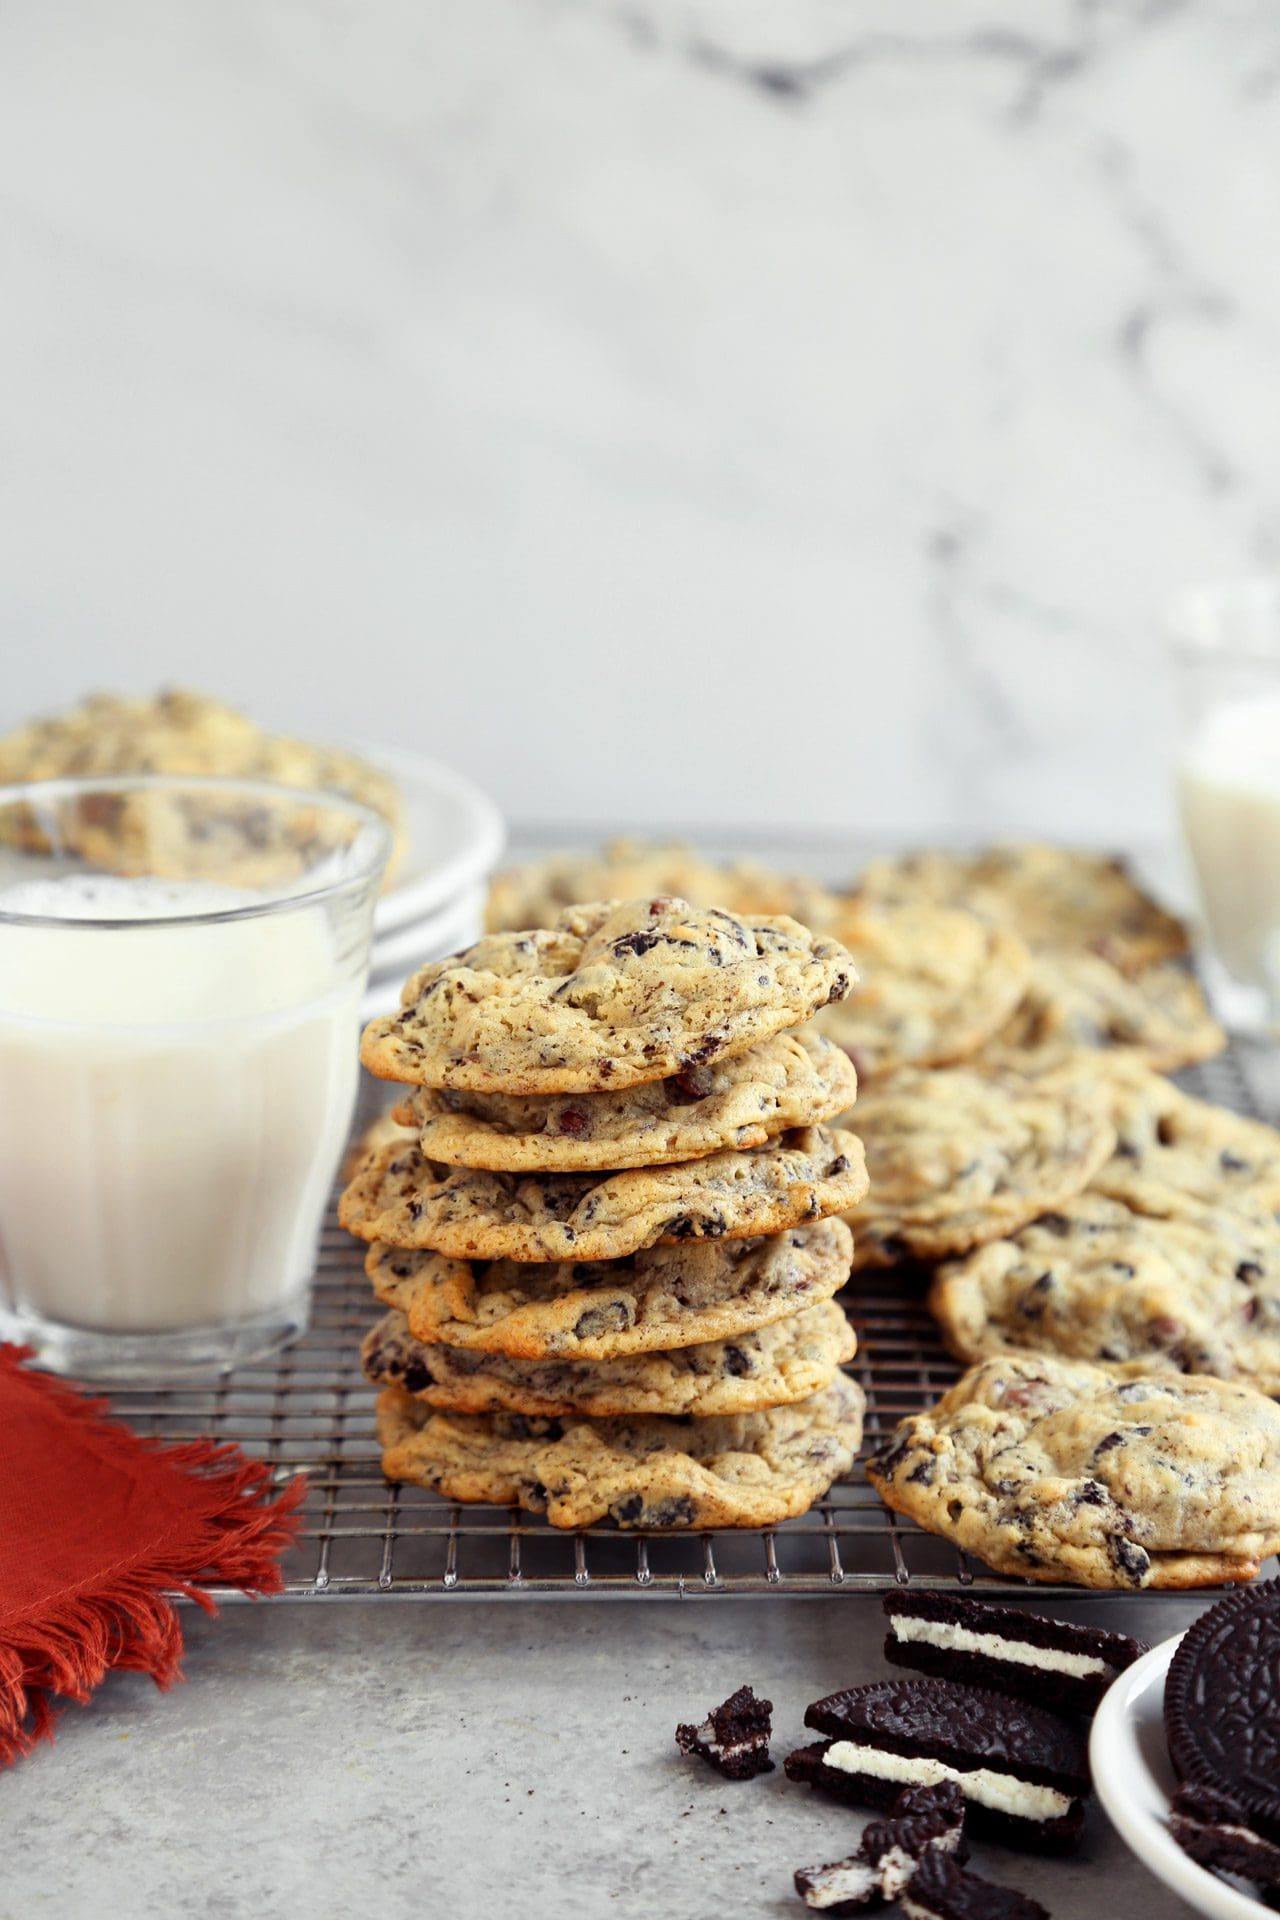 Save on Our Brand Bakery Chocolate Chip Cookies - 20 ct Order